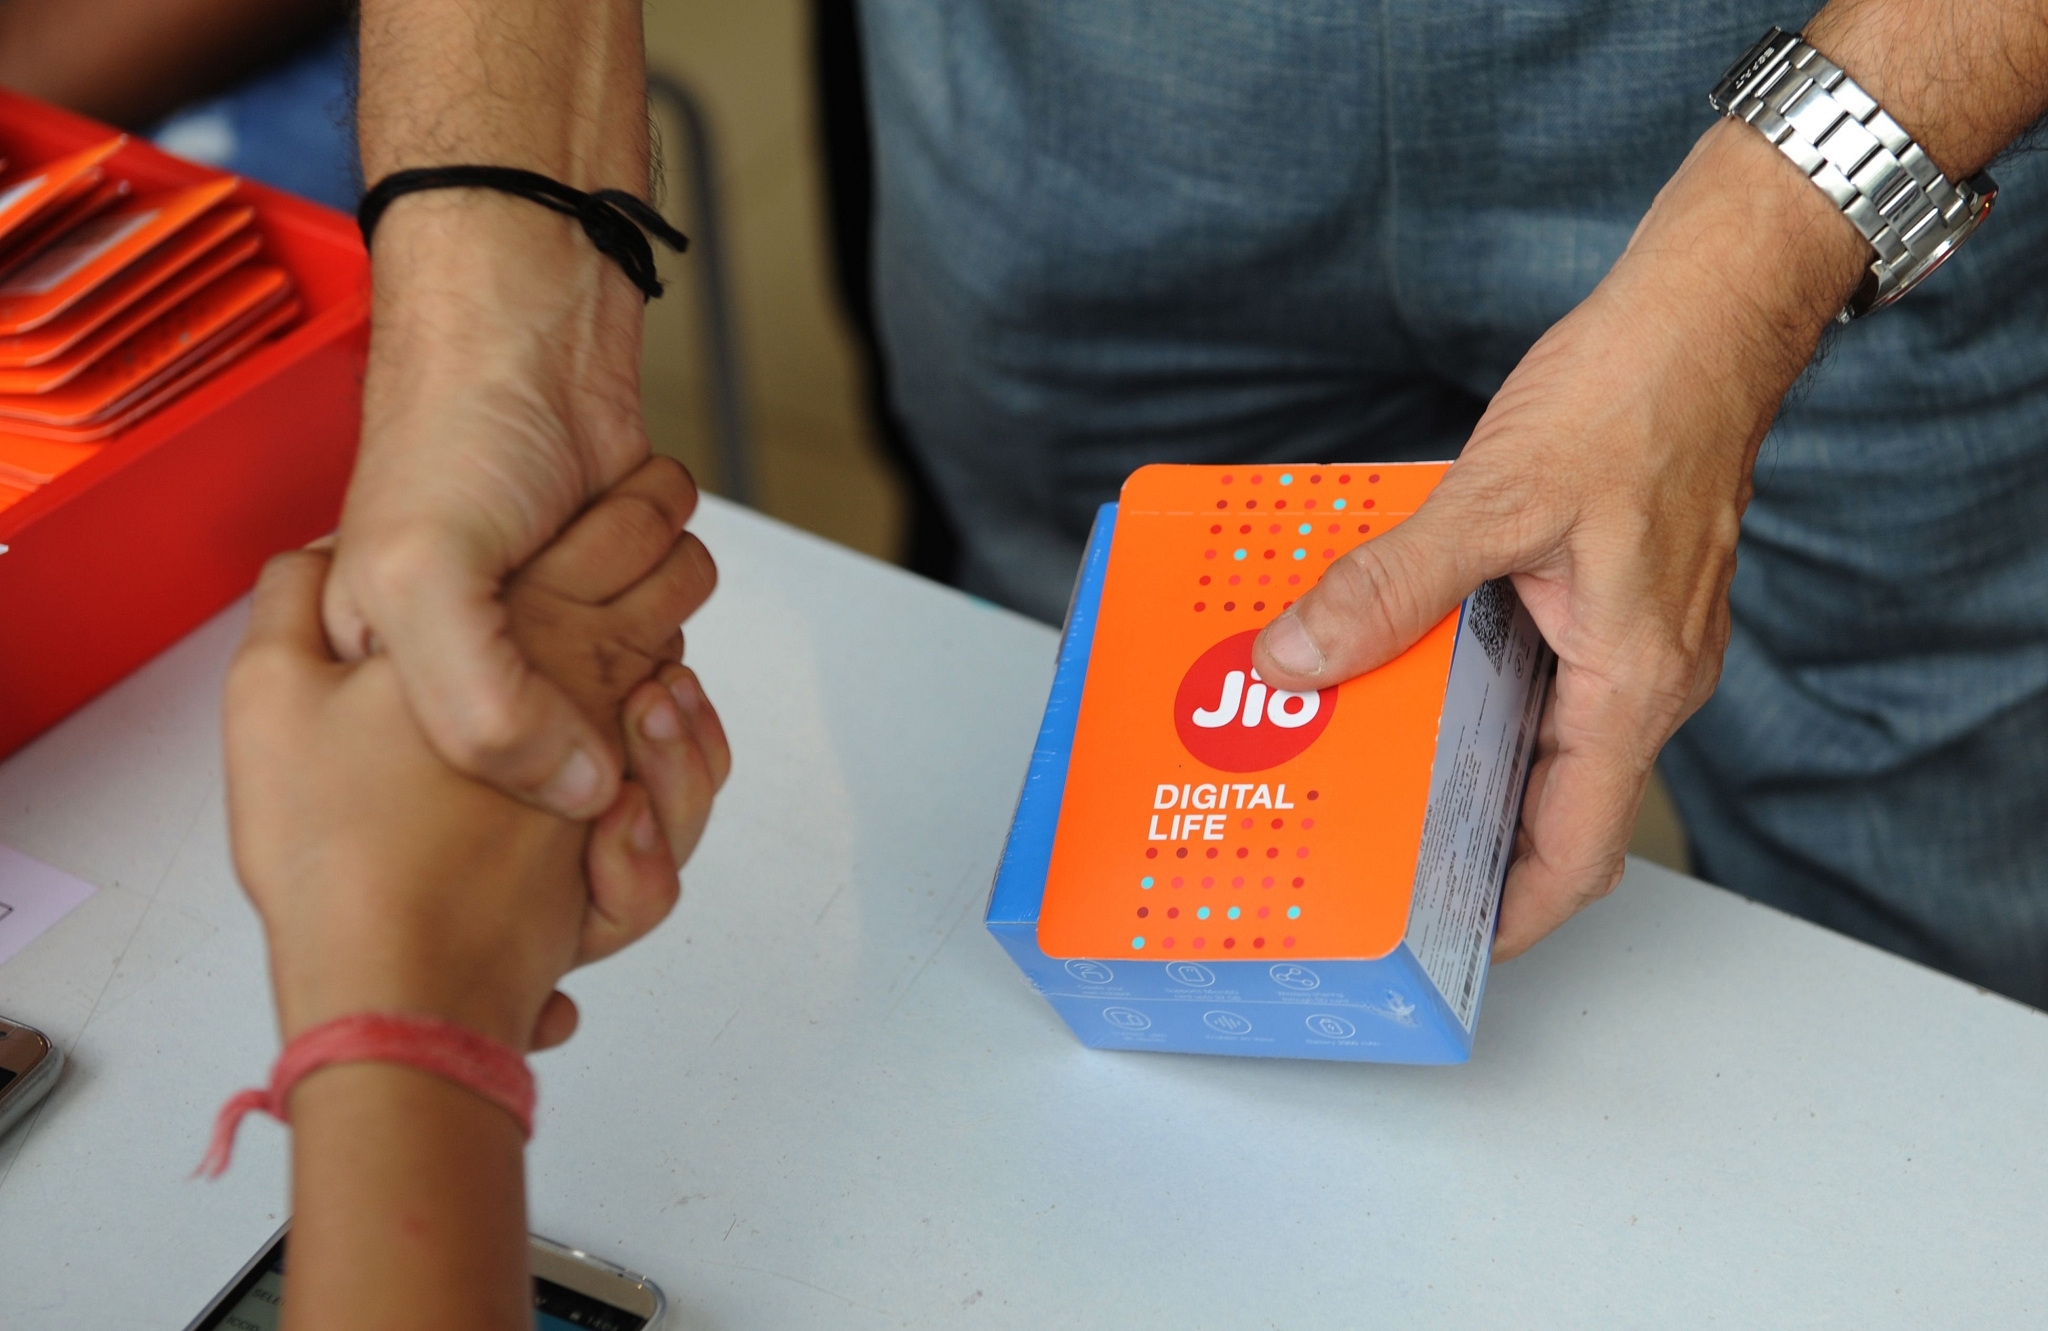 A customer shaking hands after purchasing a Jio device/Indraneel Mukherjee, Getty Images